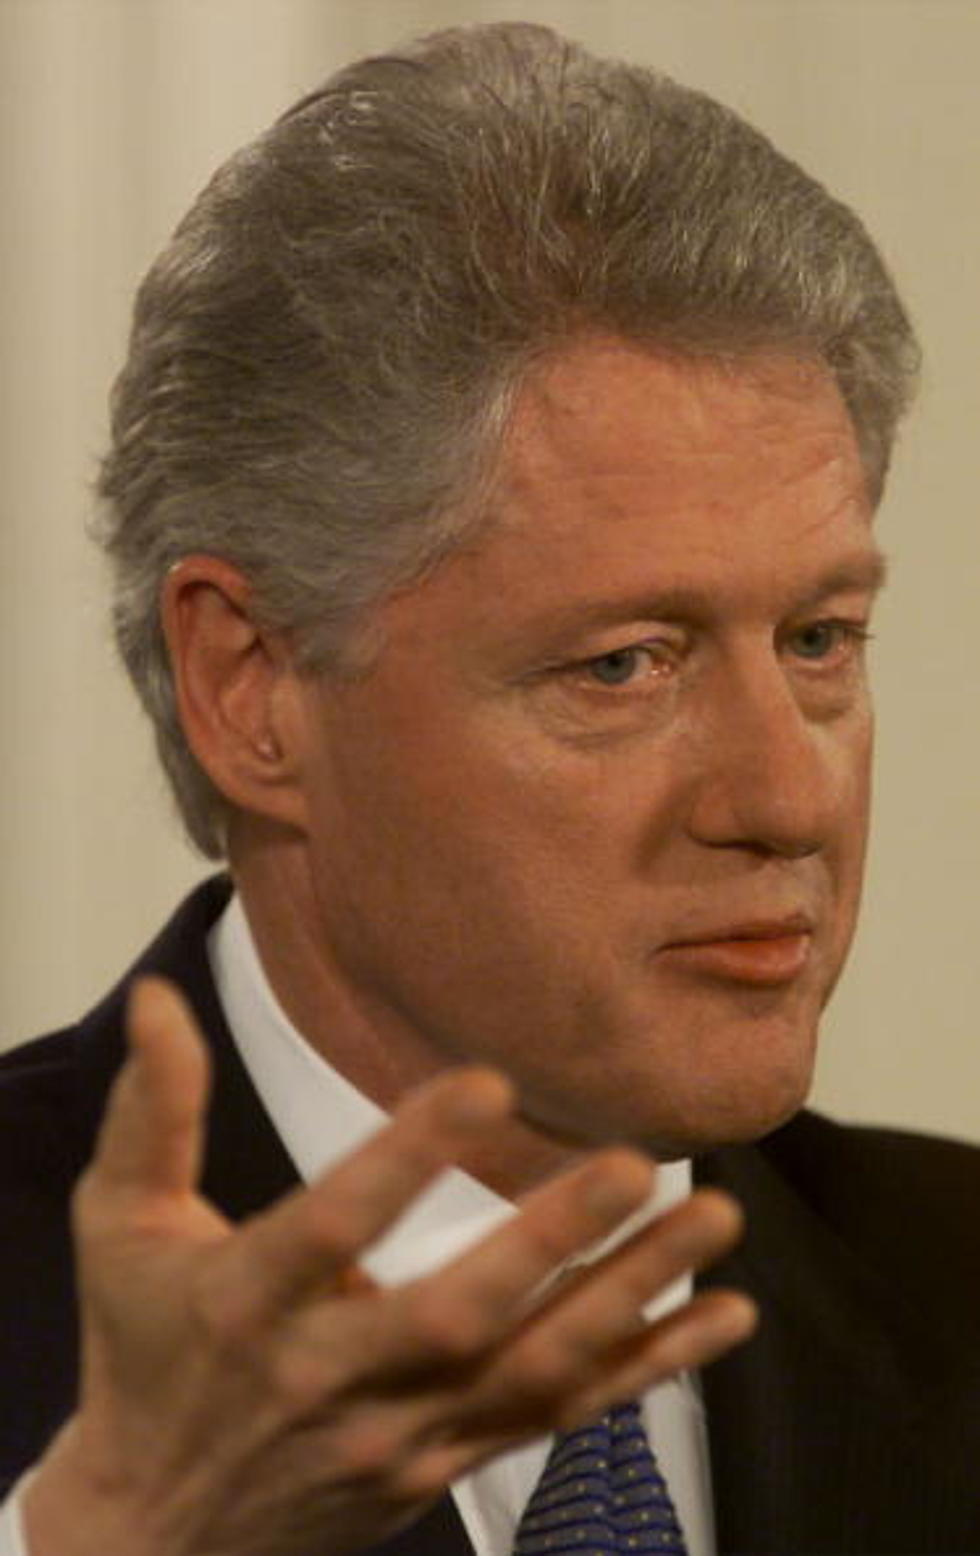 The Last Time the Government Shut Down, It Led Directly To the Clinton-Lewinsky Affair